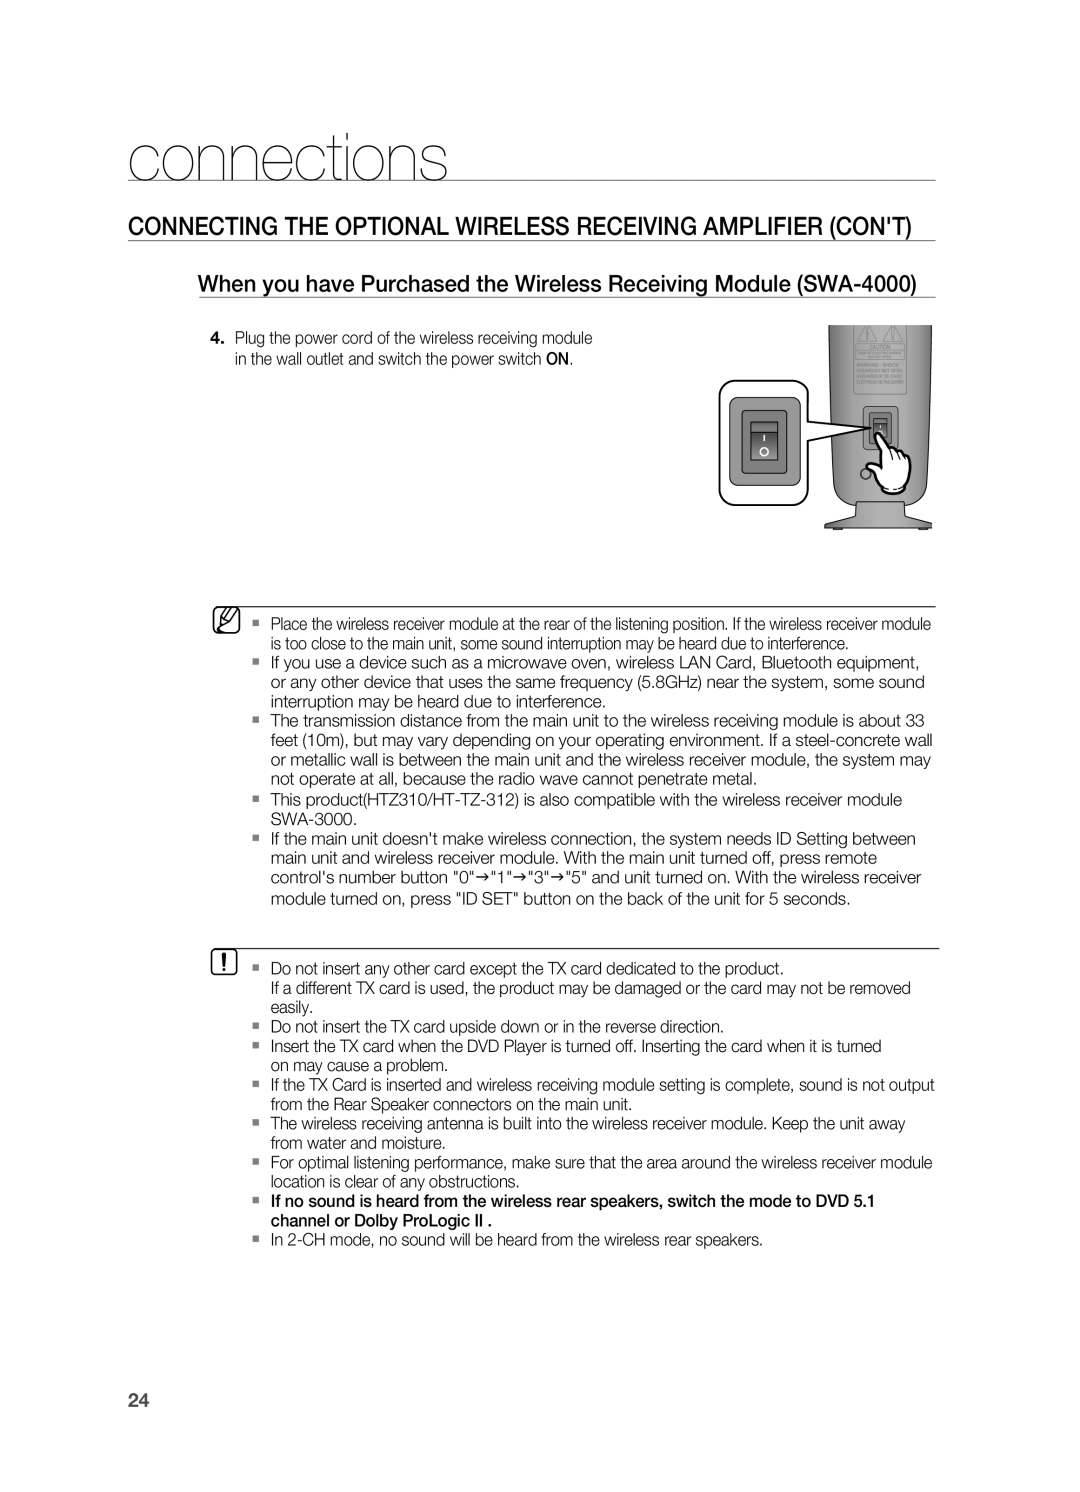 Samsung AH68-02055S manual connections, Connecting the Optional Wireless Receiving Amplifier cont 